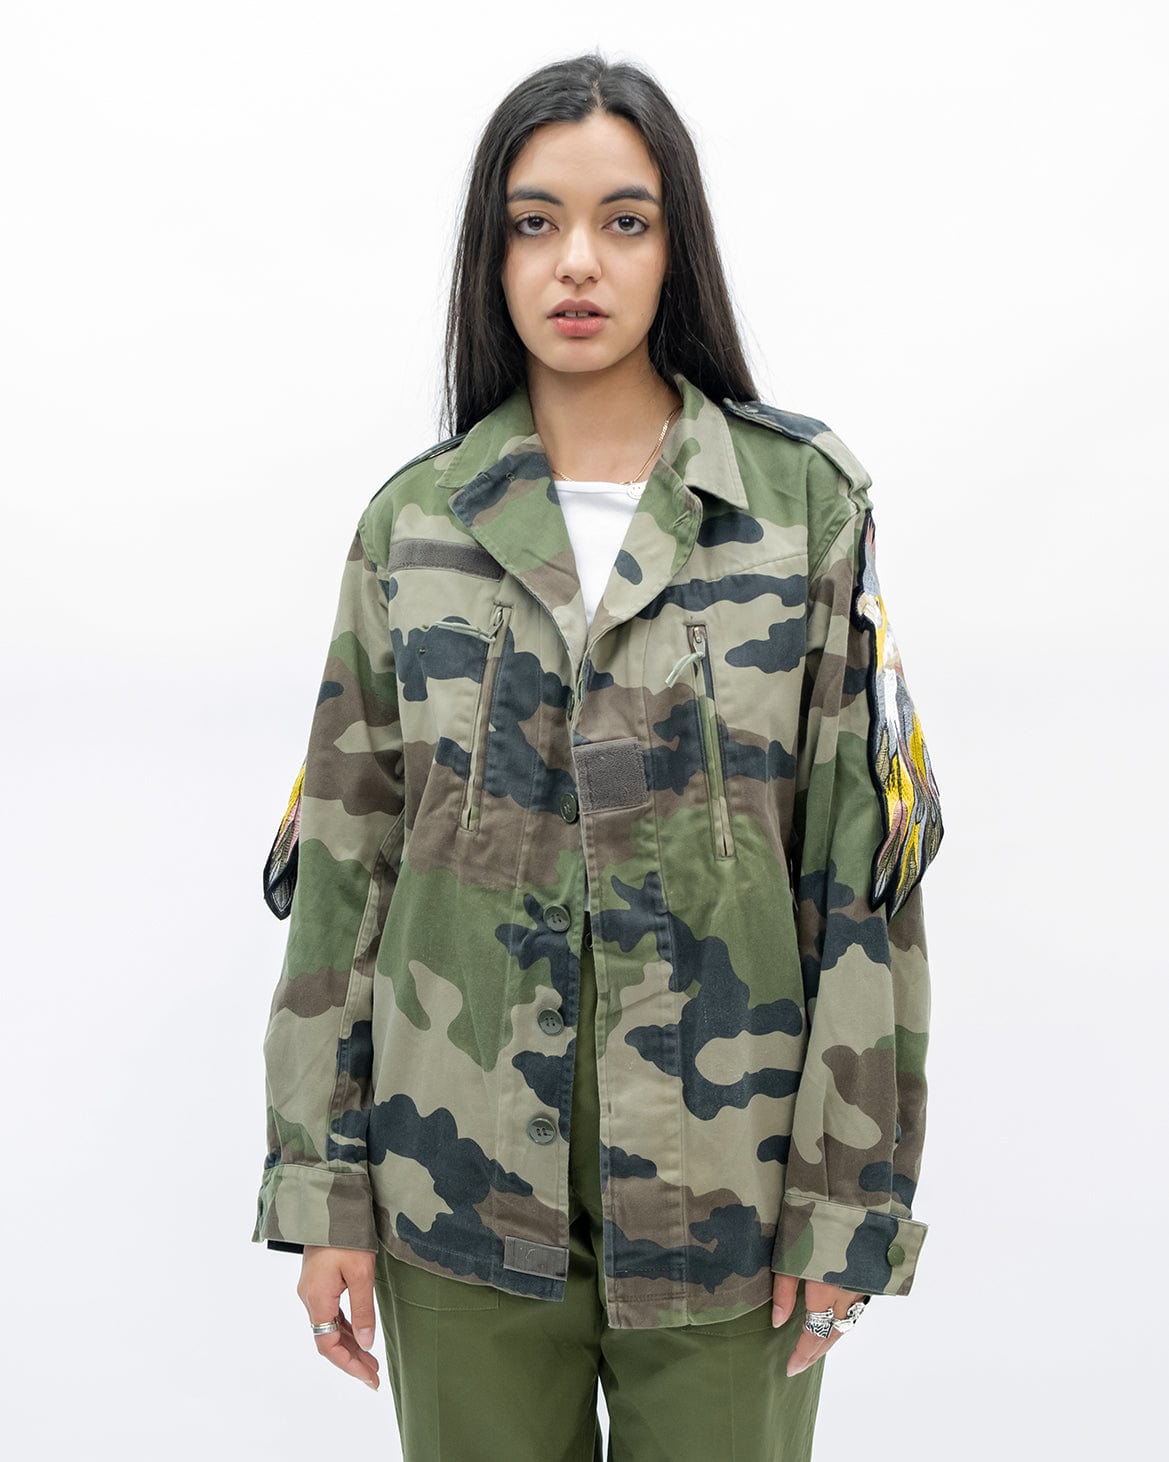 Evergreen - Camo Parrot Patch F2 Jacket